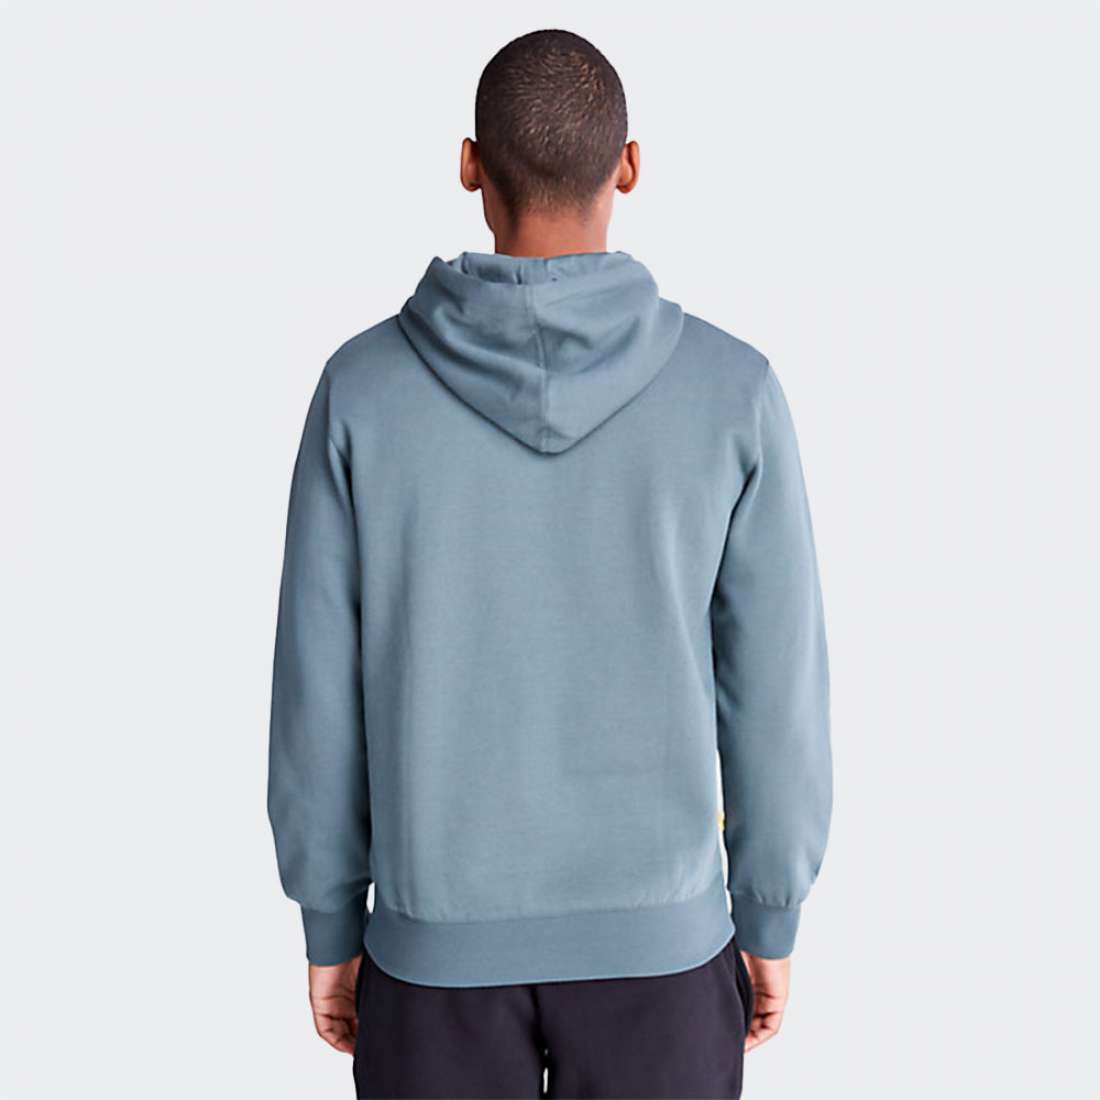 HOODIE TIMBERLAND WIND, WATER, EARTH AND SKY BALSAM GREEN